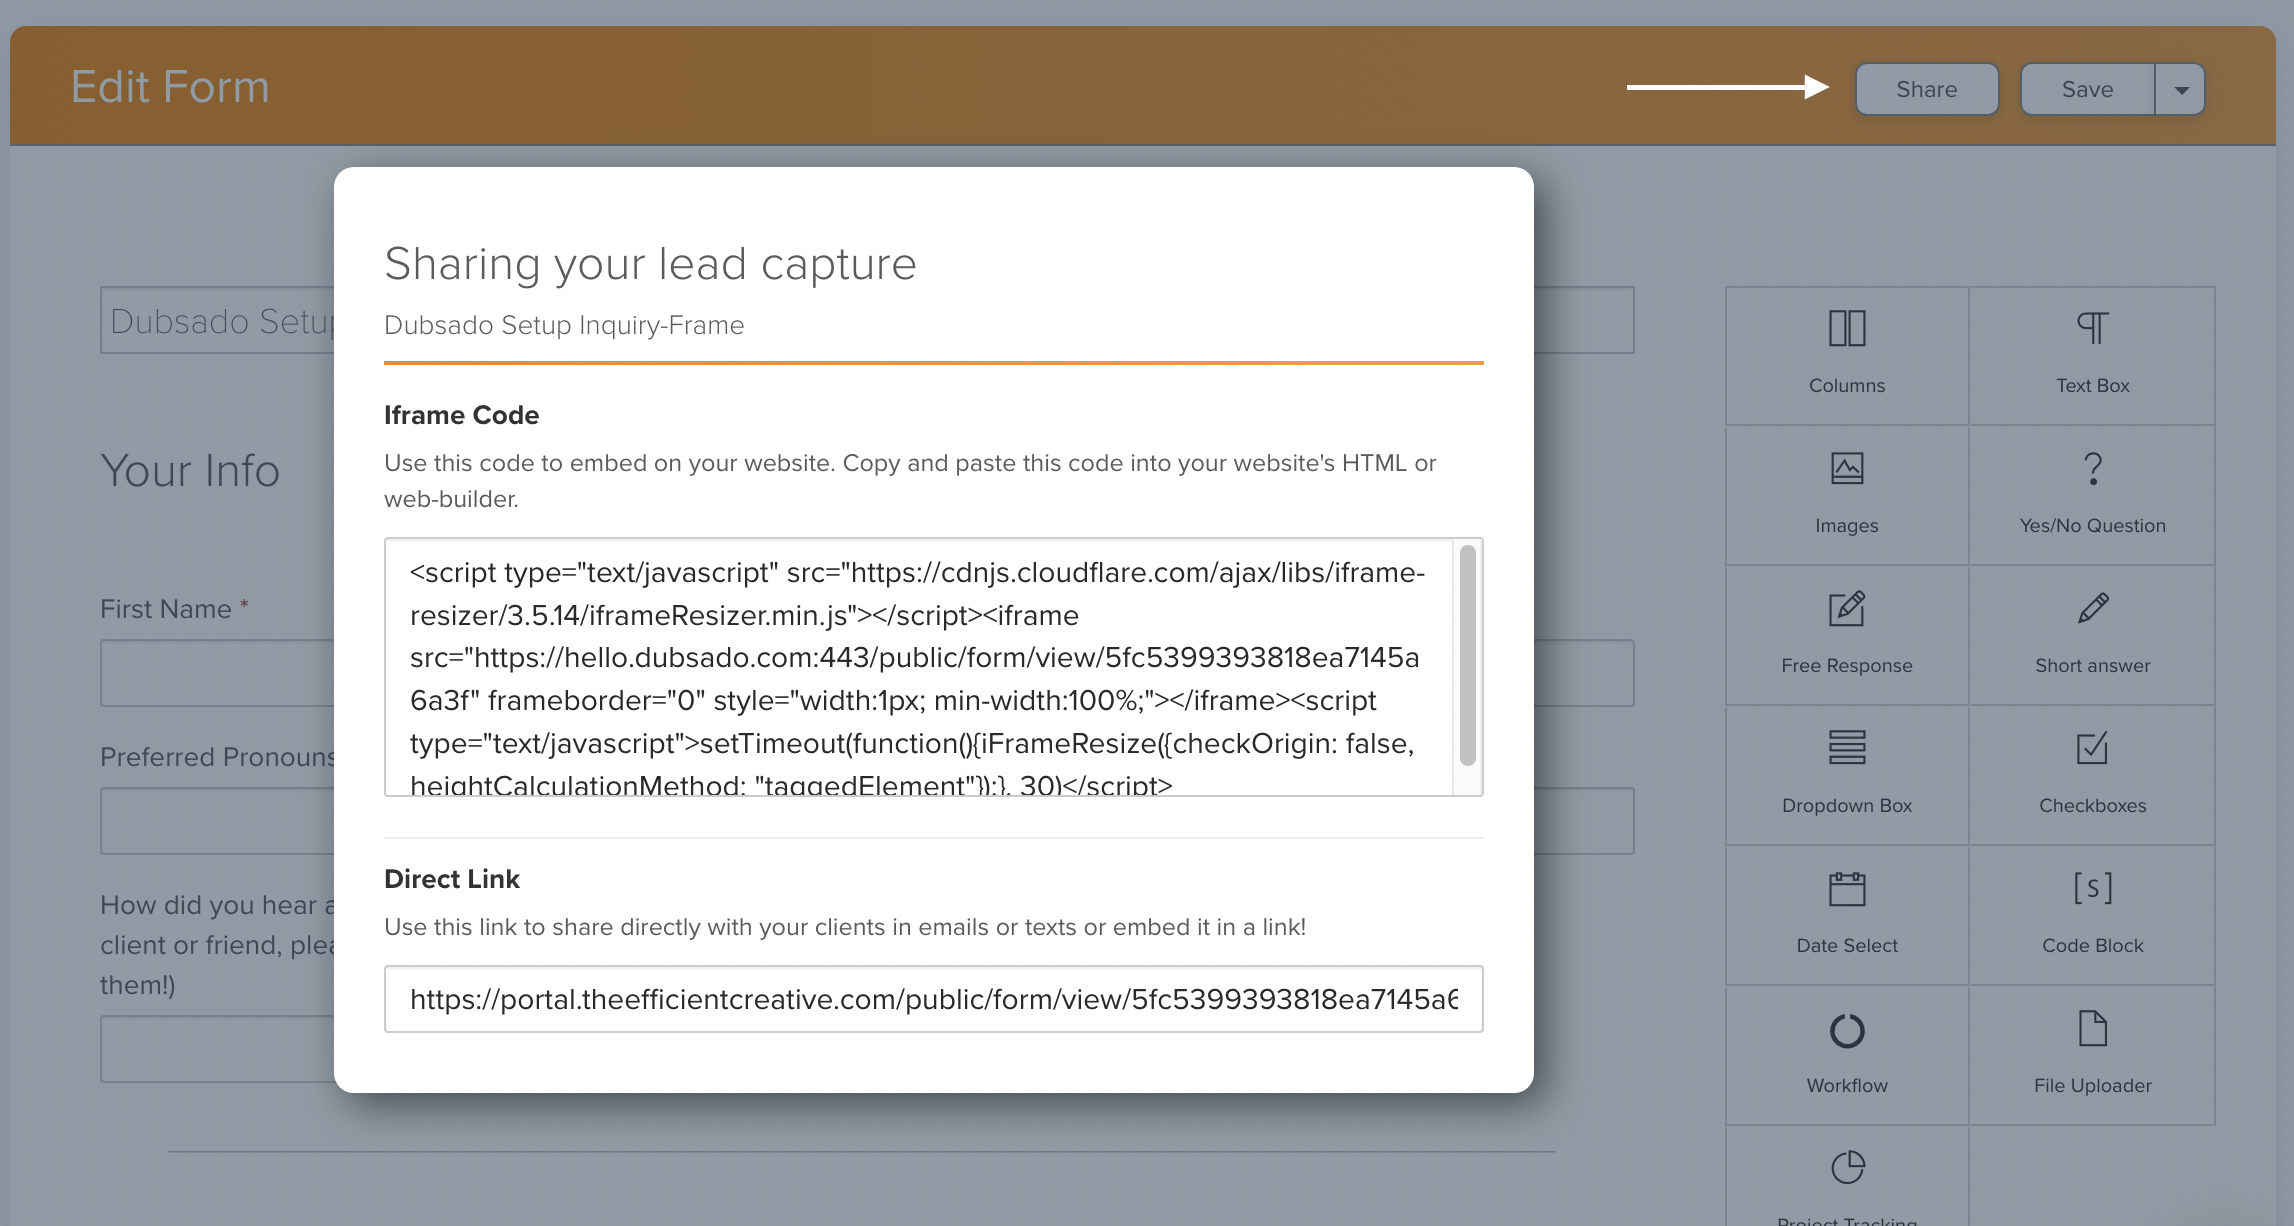 Sharing lead capture form to your website from Dubsado